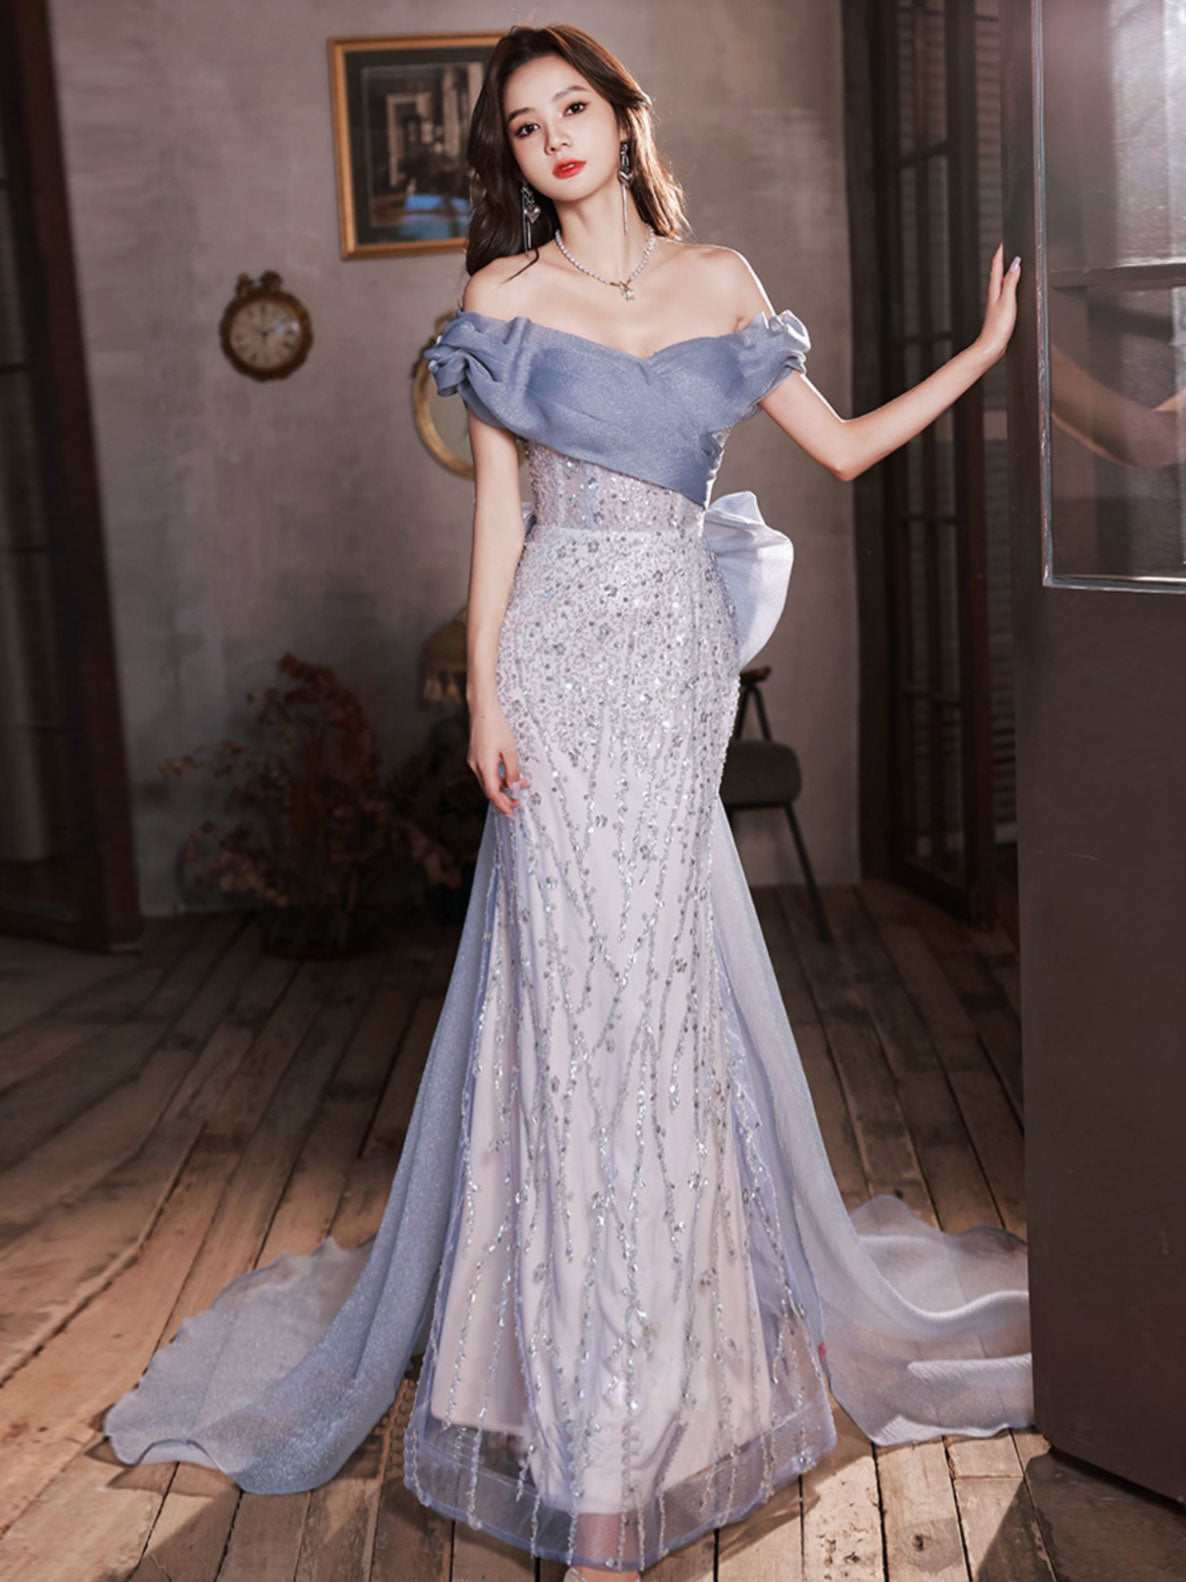 Dusty Blue Fishtailk Fitted Off The Shoulder Occasion Dress Prom Dress - DollyGown